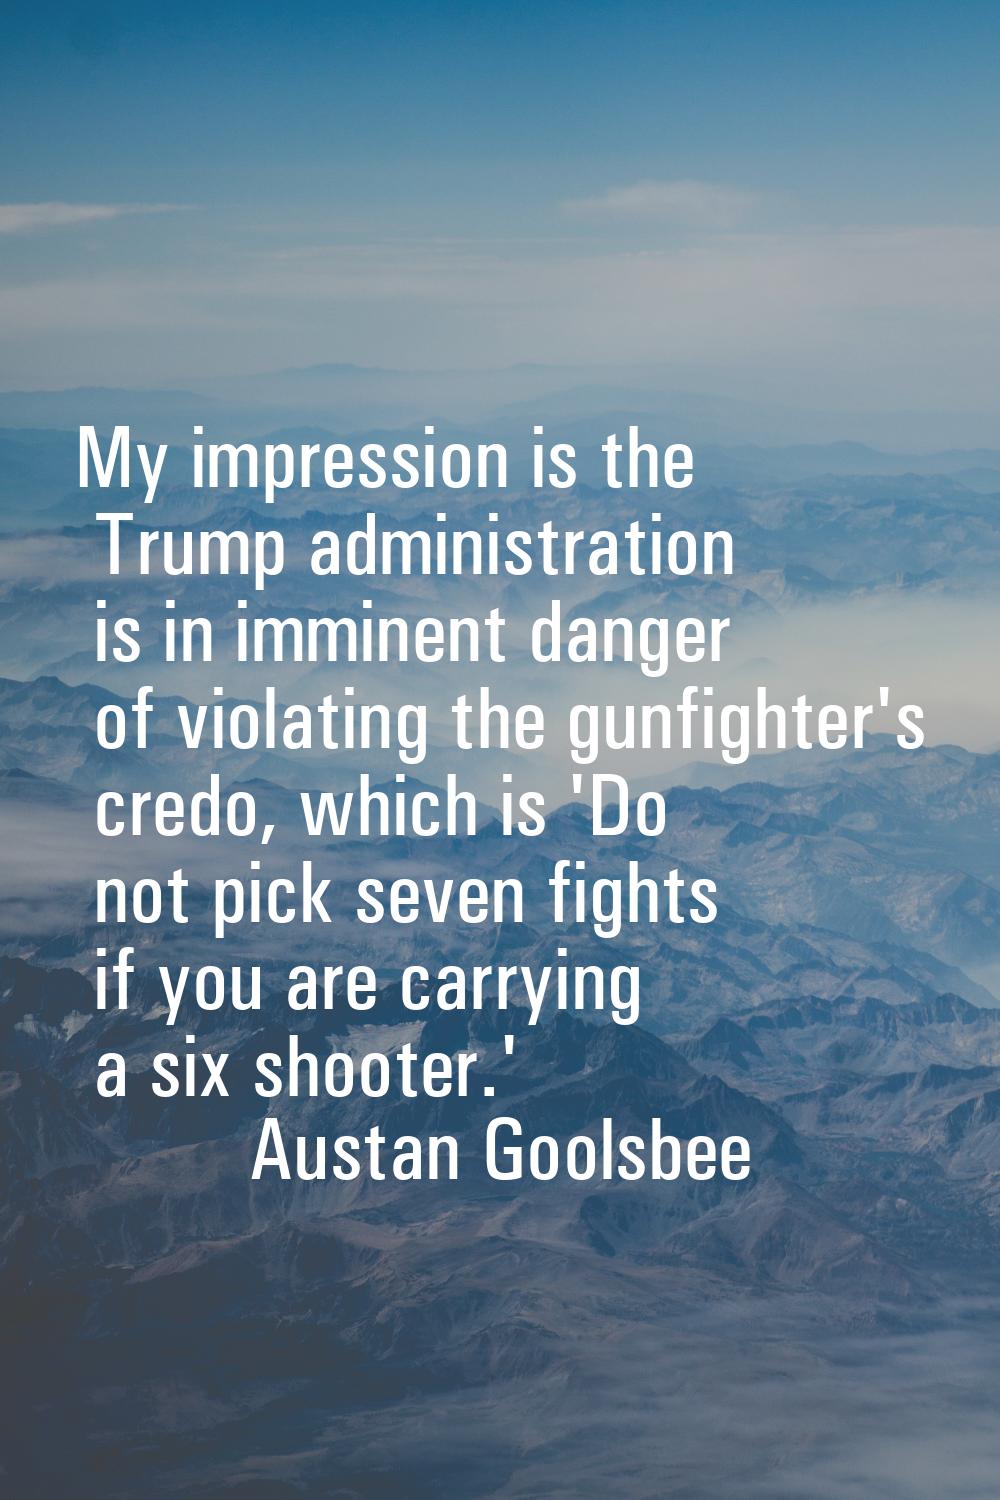 My impression is the Trump administration is in imminent danger of violating the gunfighter's credo